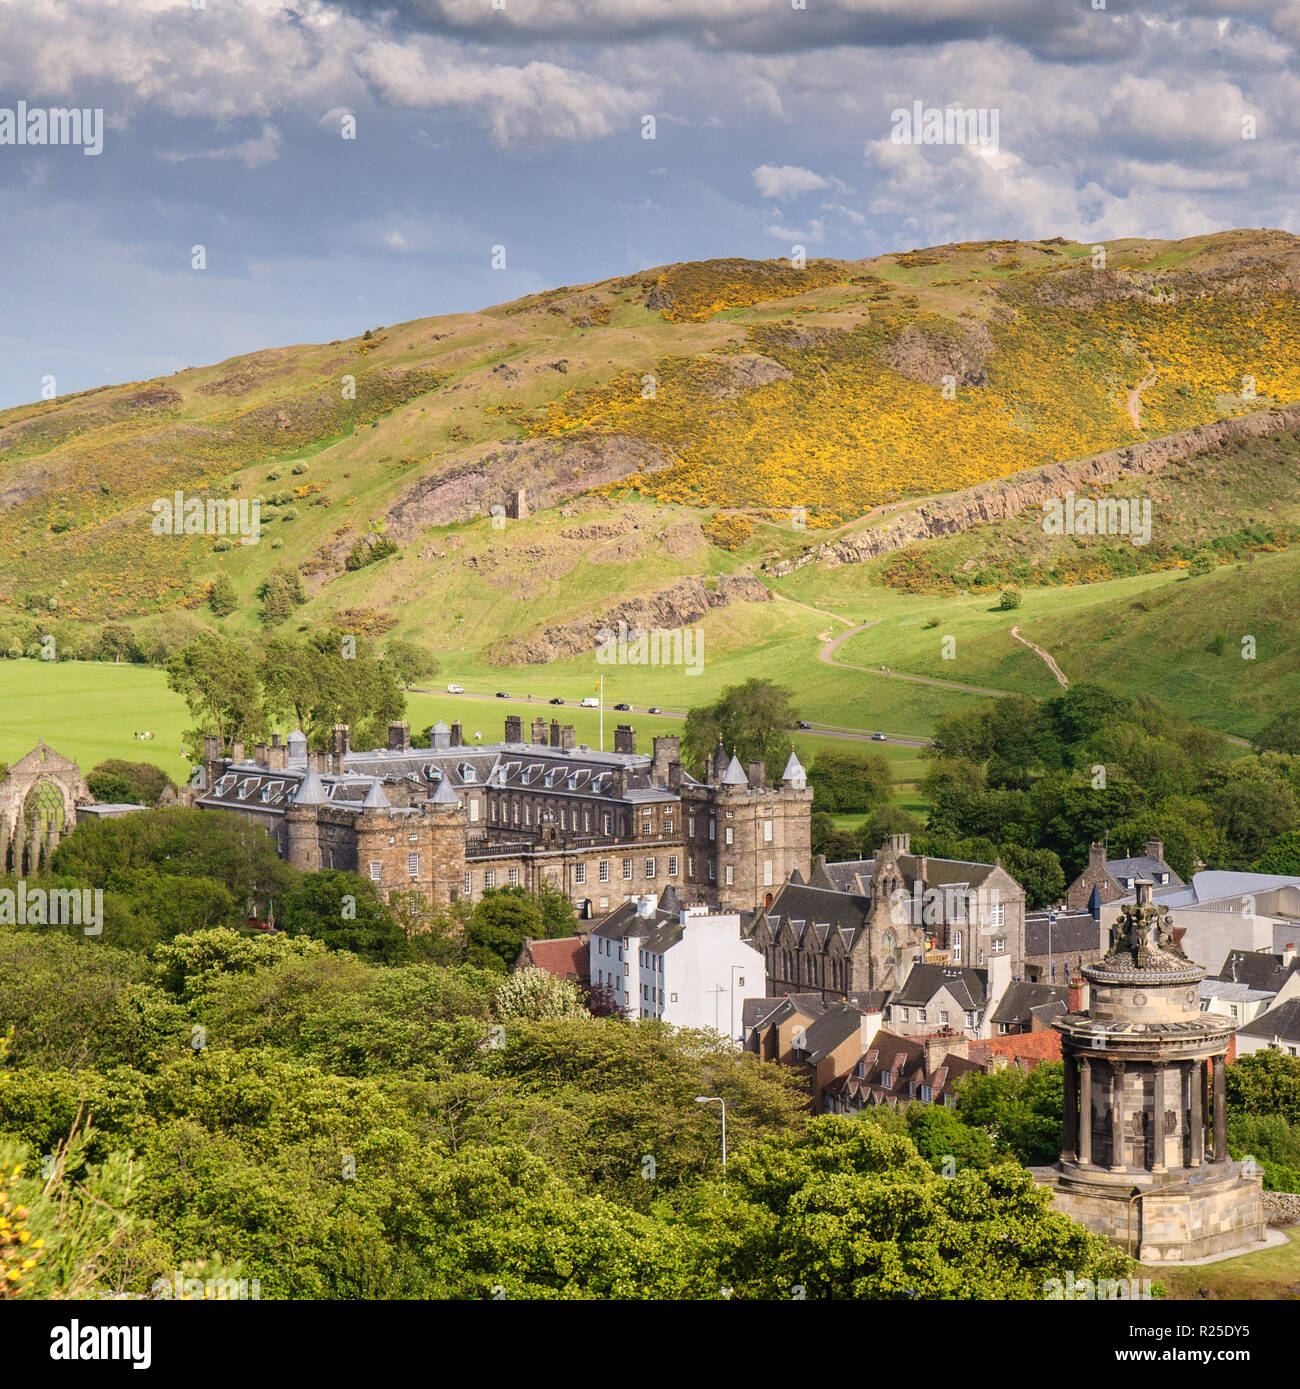 Edinburgh, Scotland, UK - May 30, 2011: Summer sun shines on the Palace of Holyroodhouse in Edinburgh, with Arthur's Seat rising behind in Holyrood Pa Stock Photo